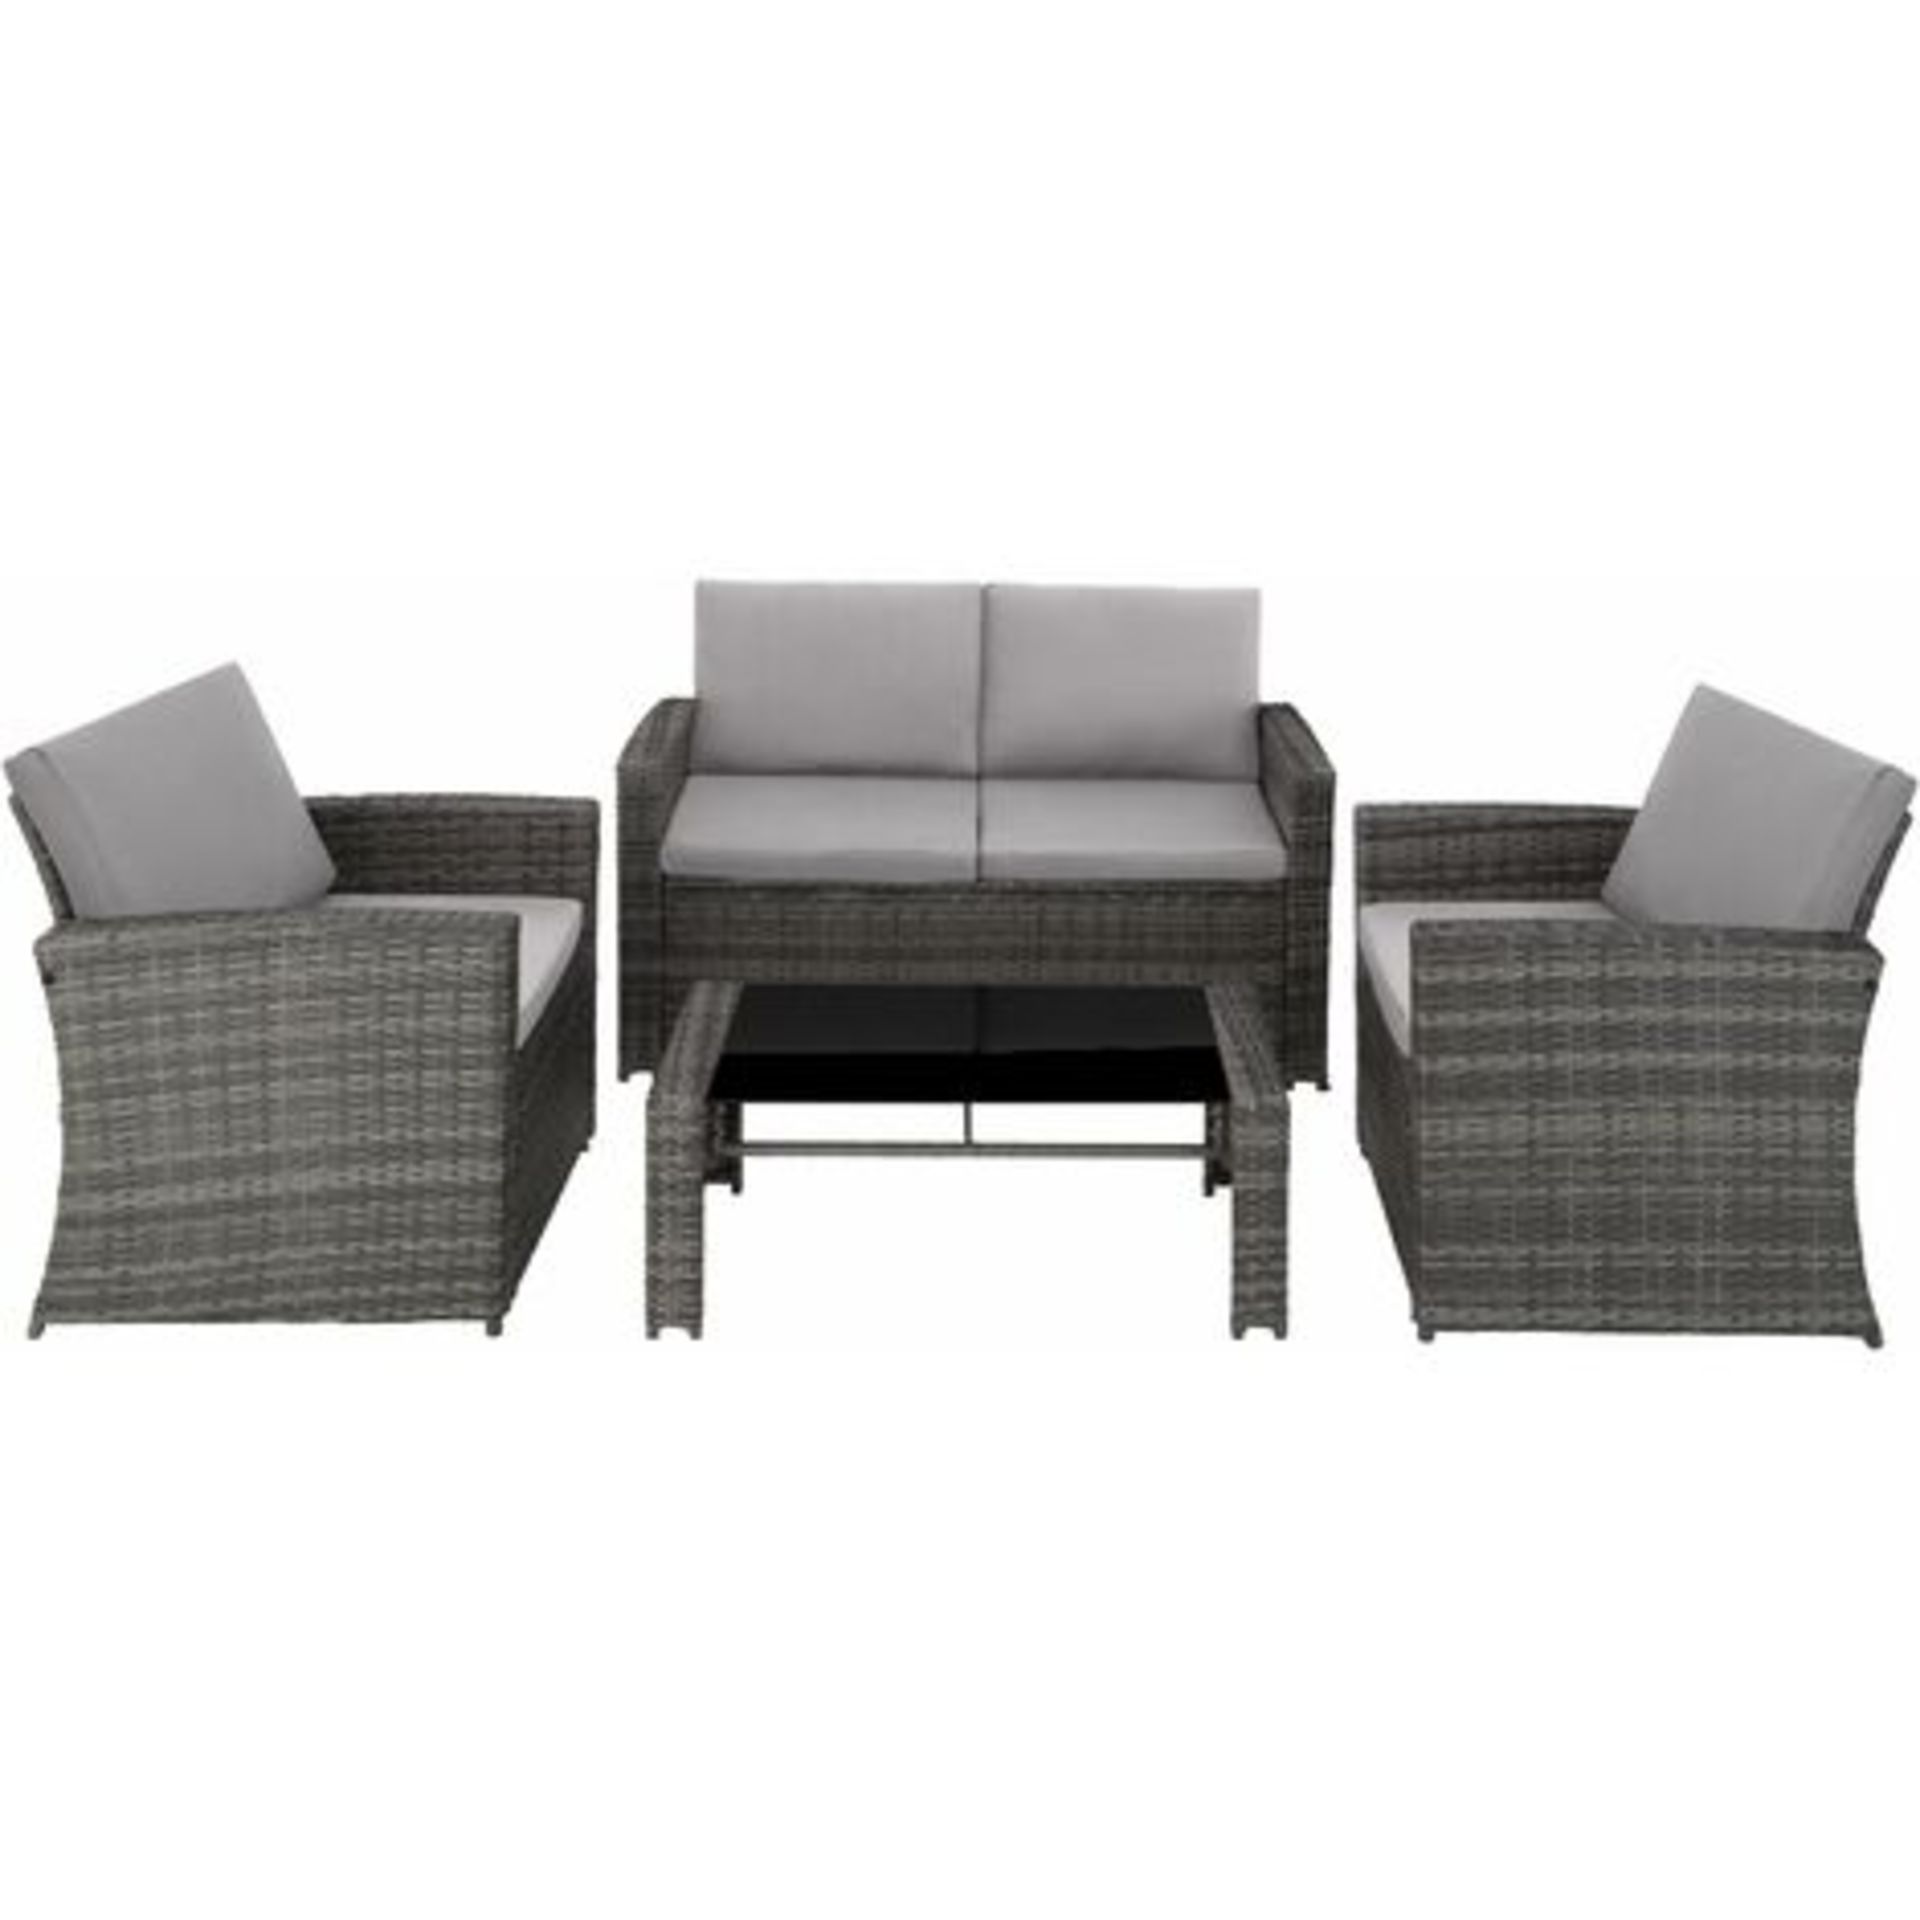 New Boxed - Luxe Valencia 4 Piece Grey Rattan Sofa Set - Includes 2 Seater Sofa, 2 x Chairs & Table.